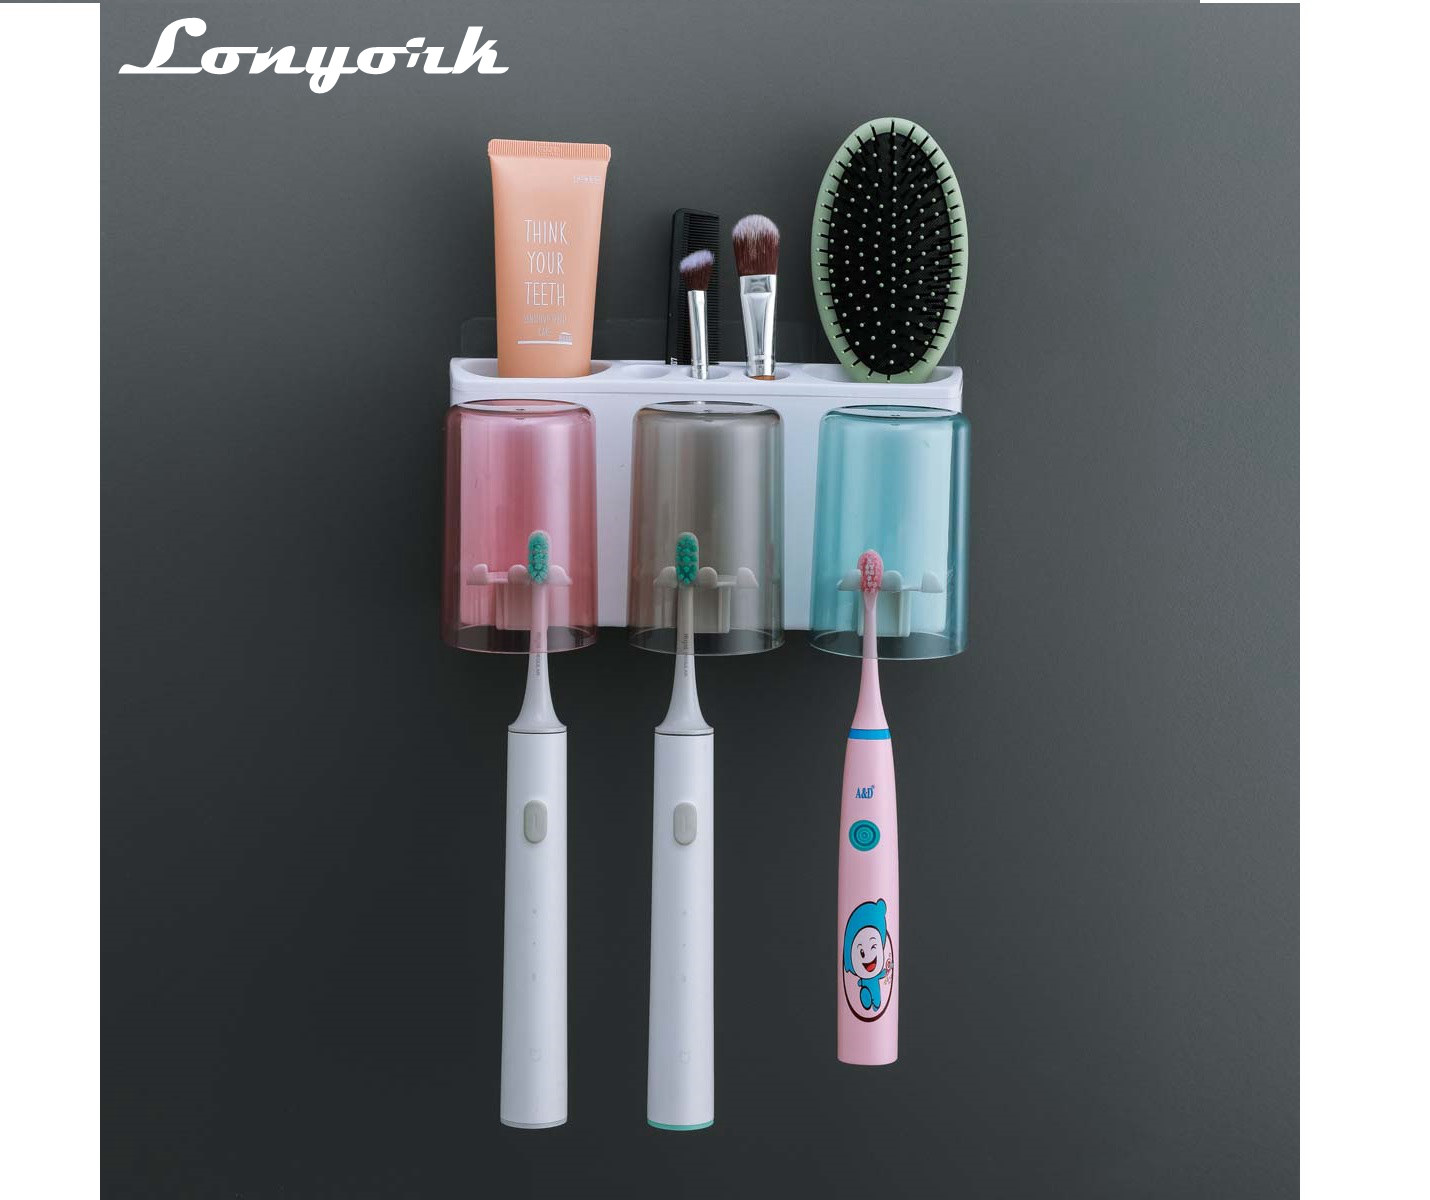 Lonyork Wall Mount Toothbrush Holder With 3 Cups